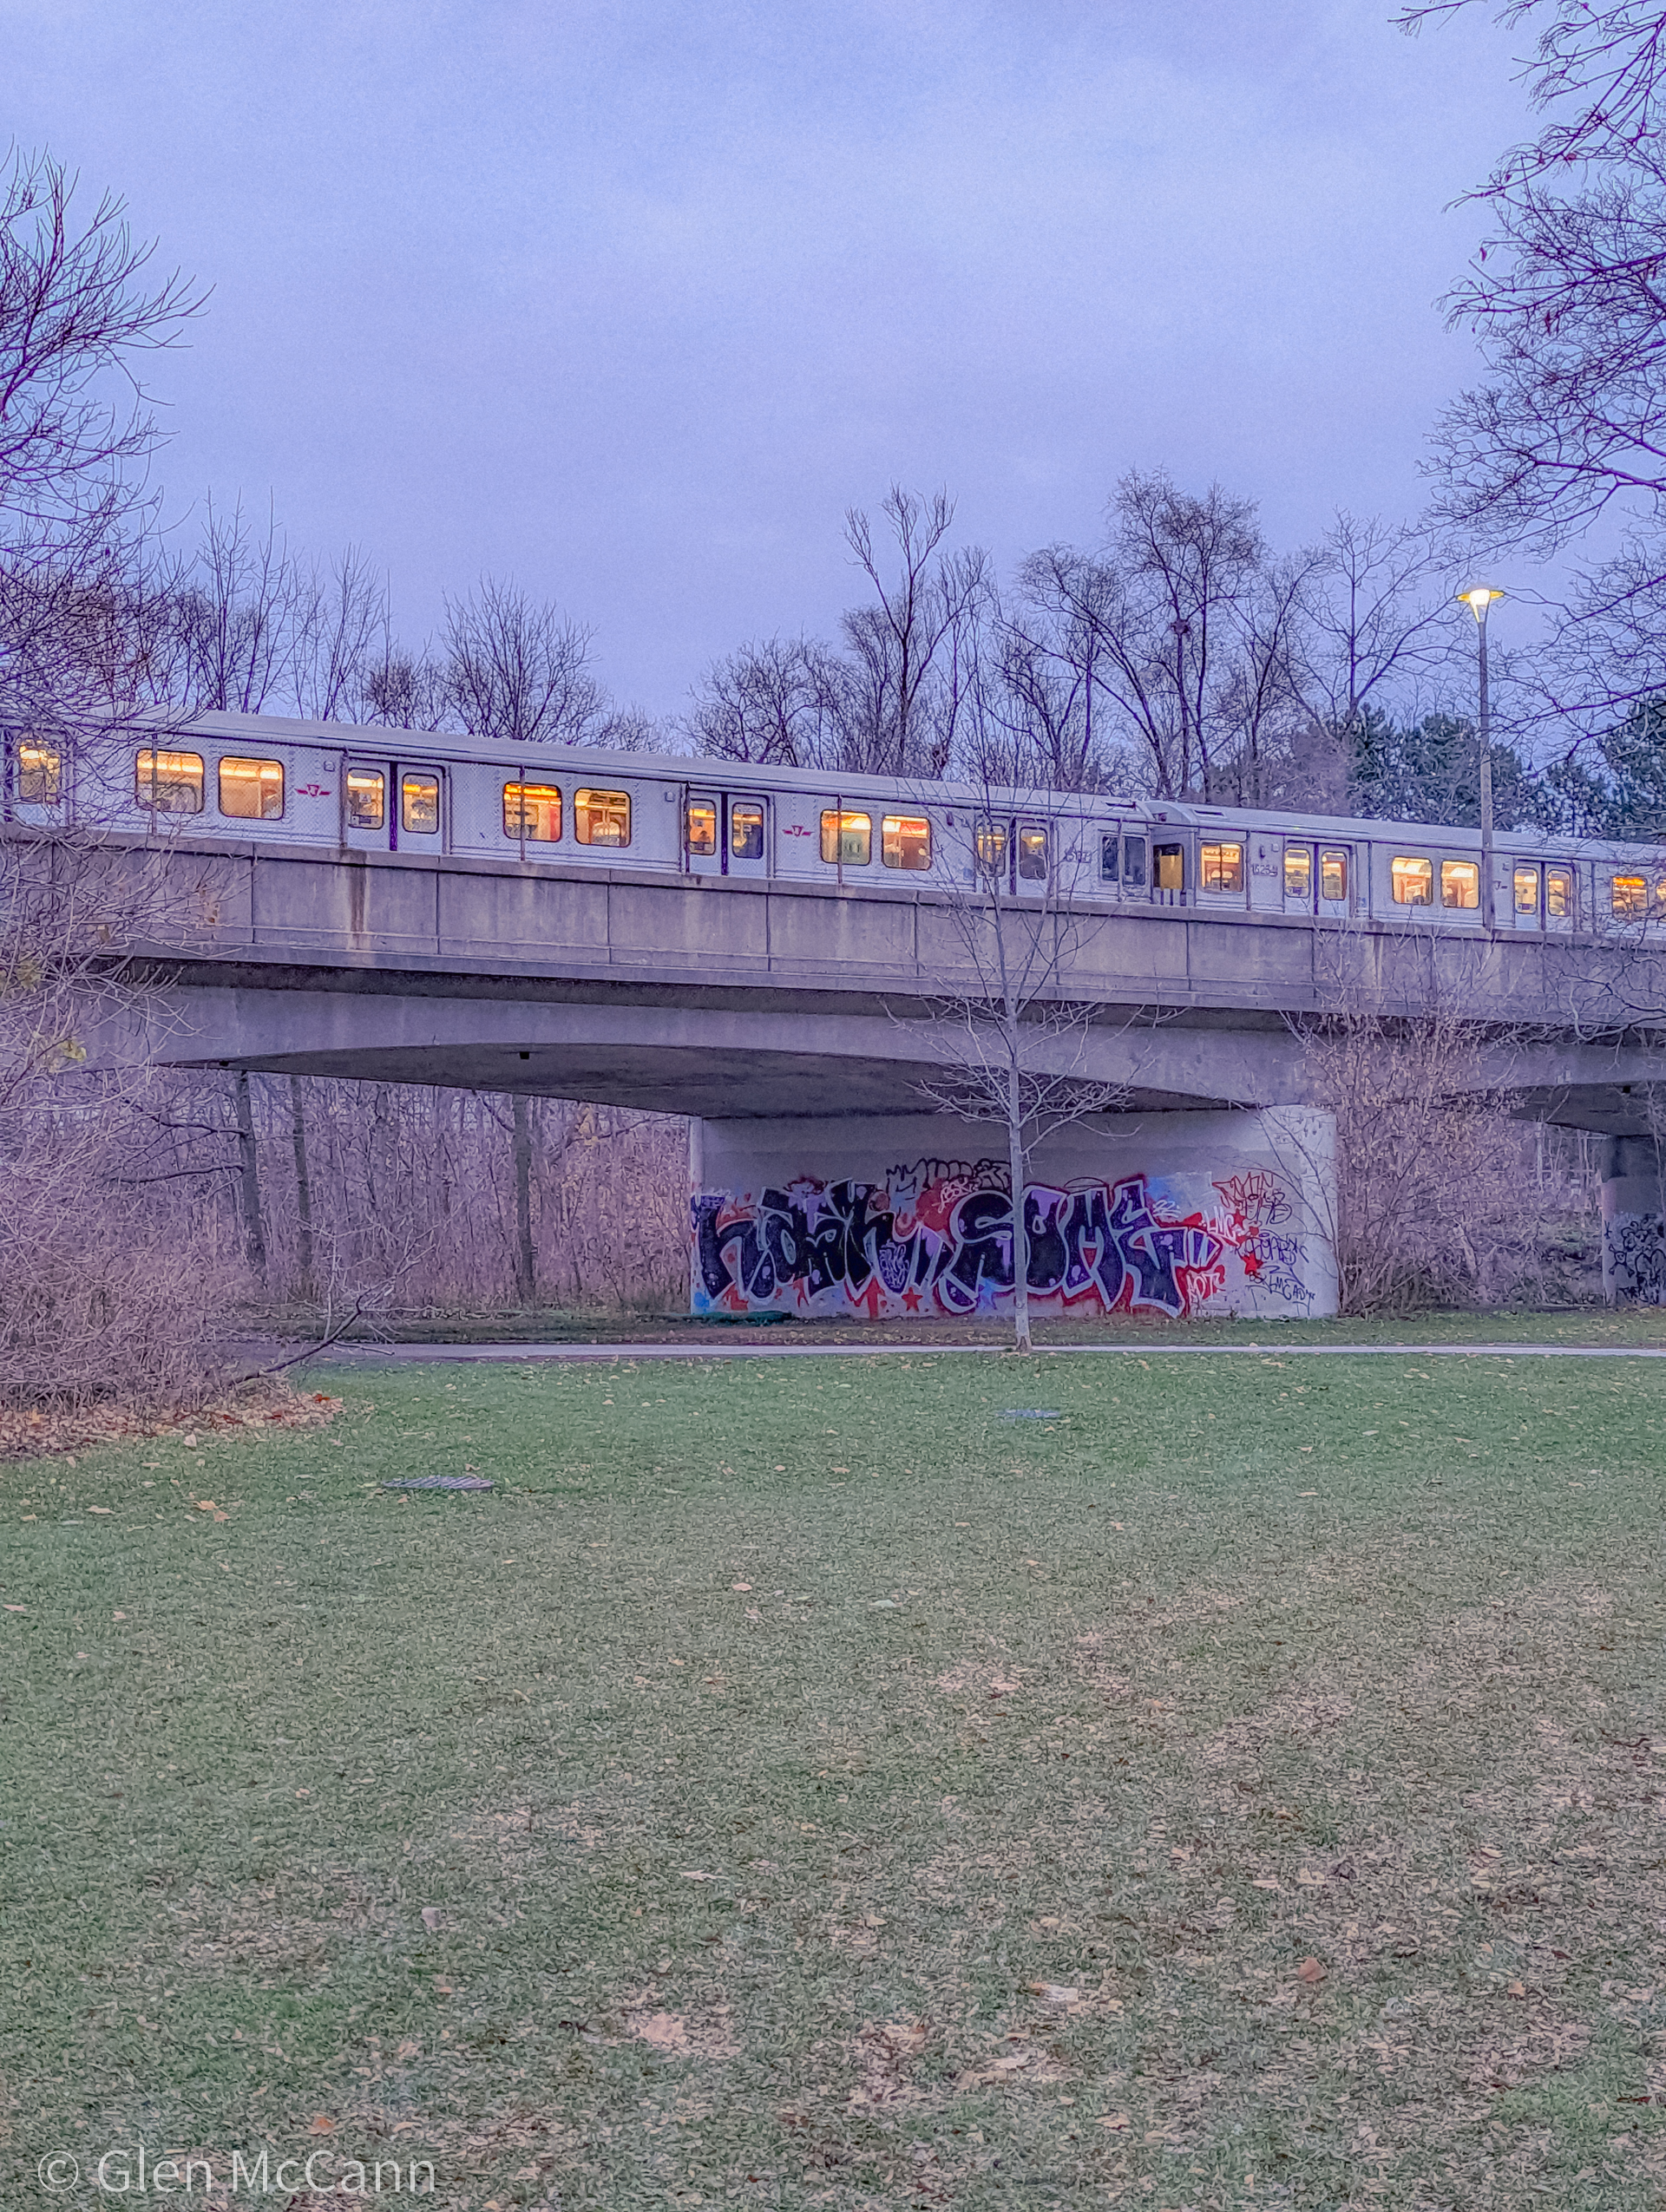 Outdoor photo of a Toronto subway car at dusk, the light from the windows causing a glow against a purple sky.